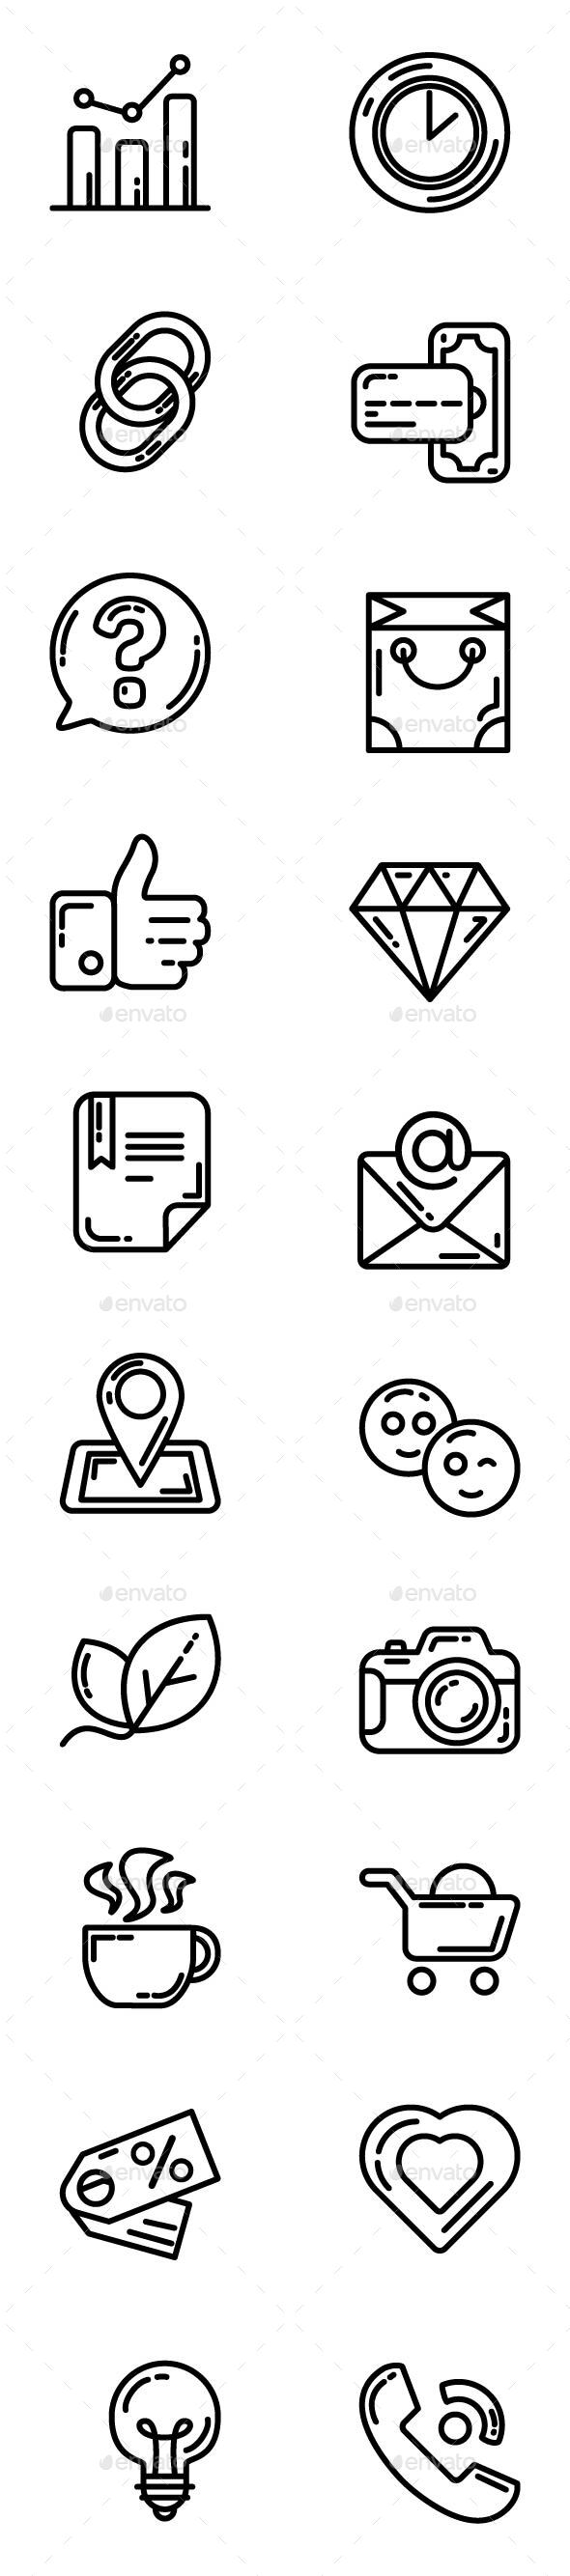 E-commerce Business Outline Icons